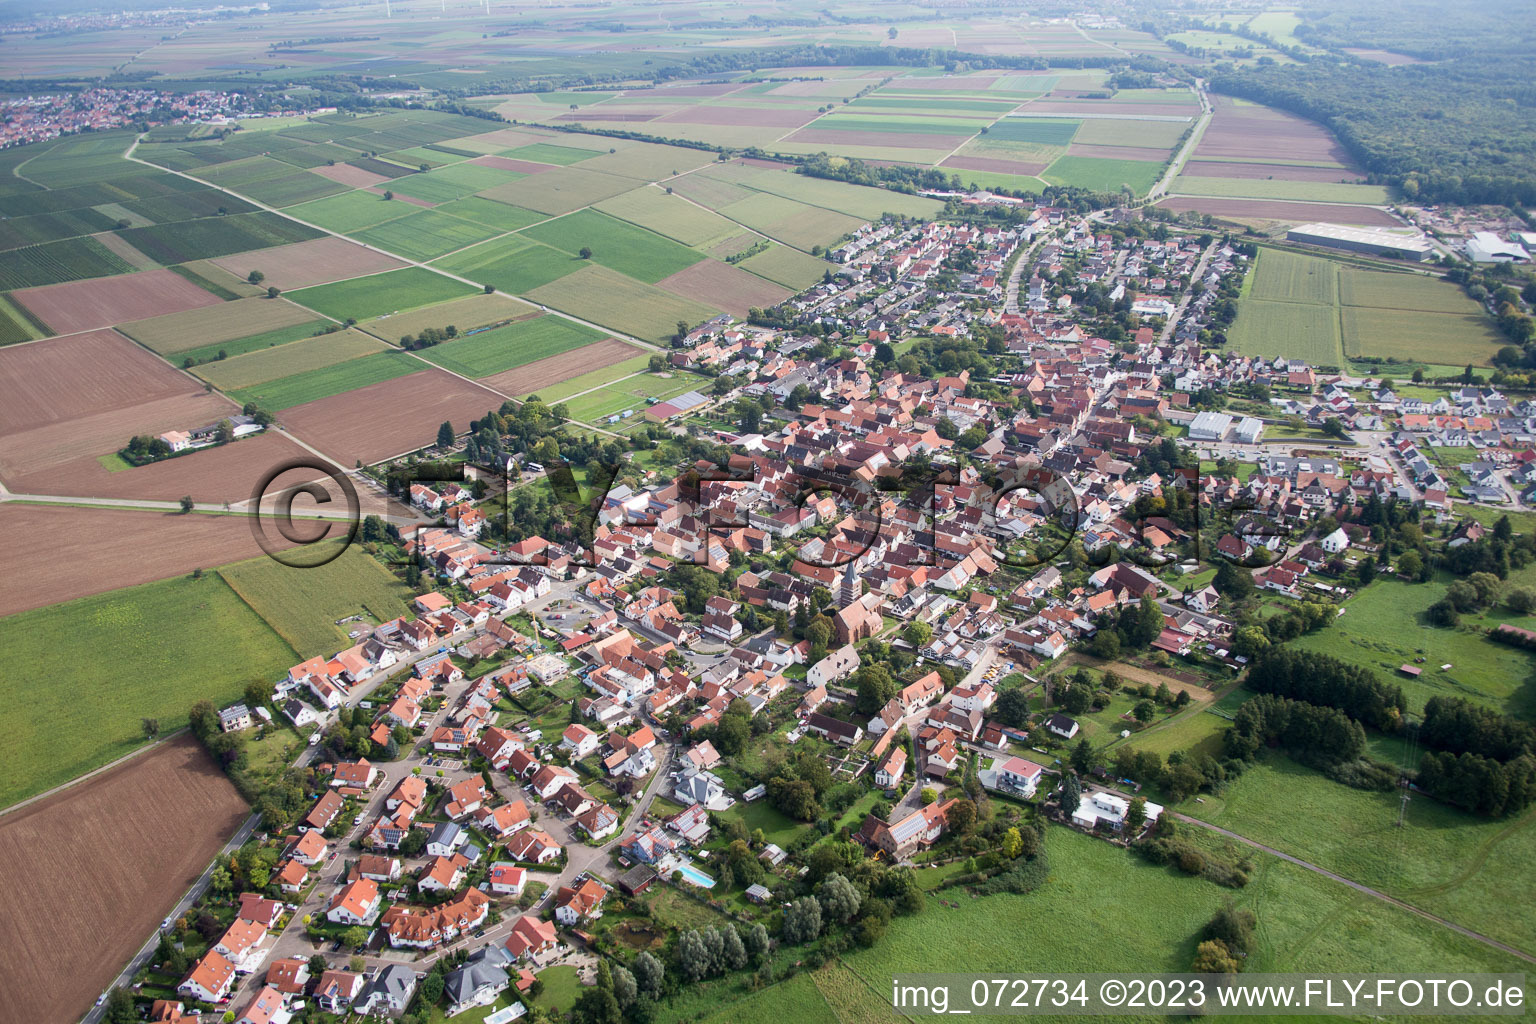 Aerial view of Rohrbach in the state Rhineland-Palatinate, Germany